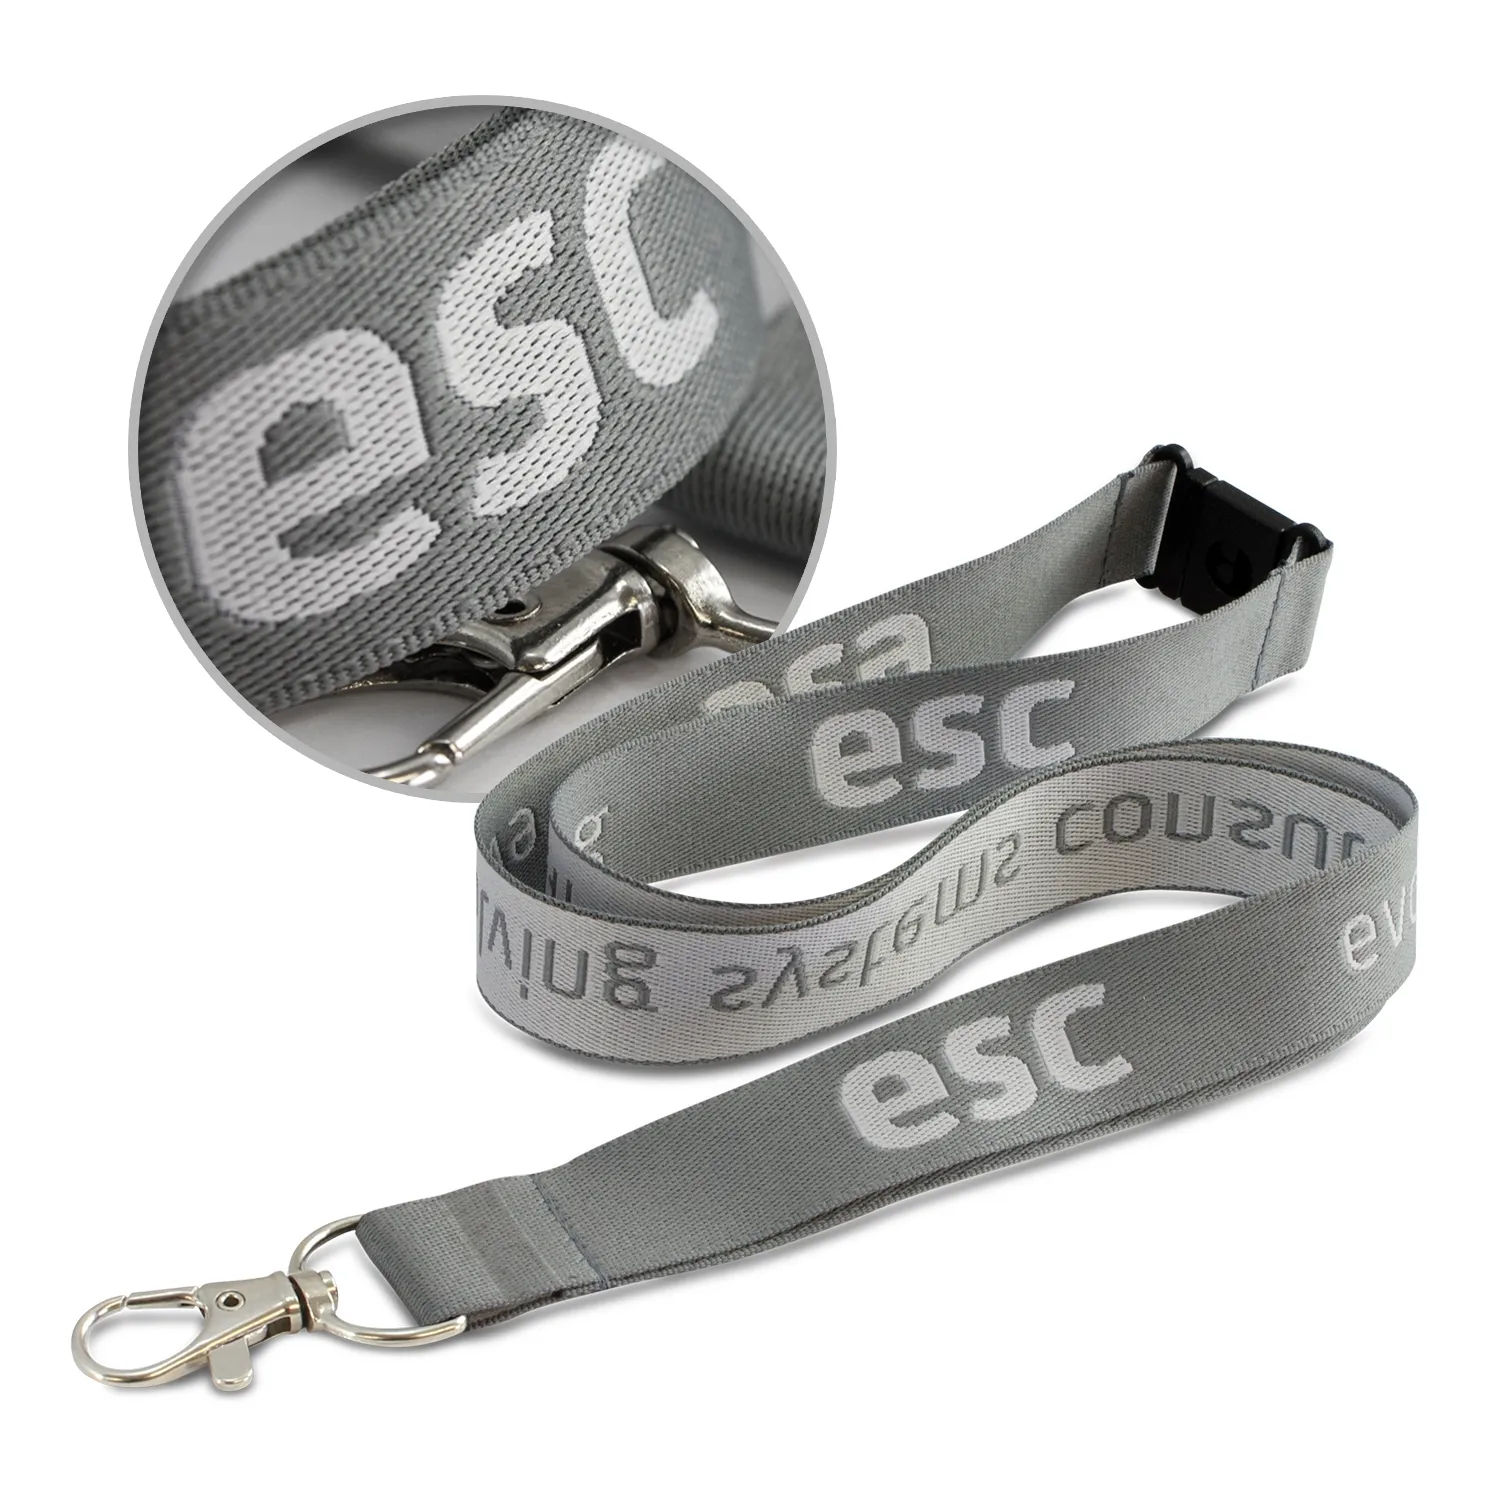 Jacquard Ribbon Lanyards with ID Holder for Corporate and School Displays - Keep your staff or students' IDs secure